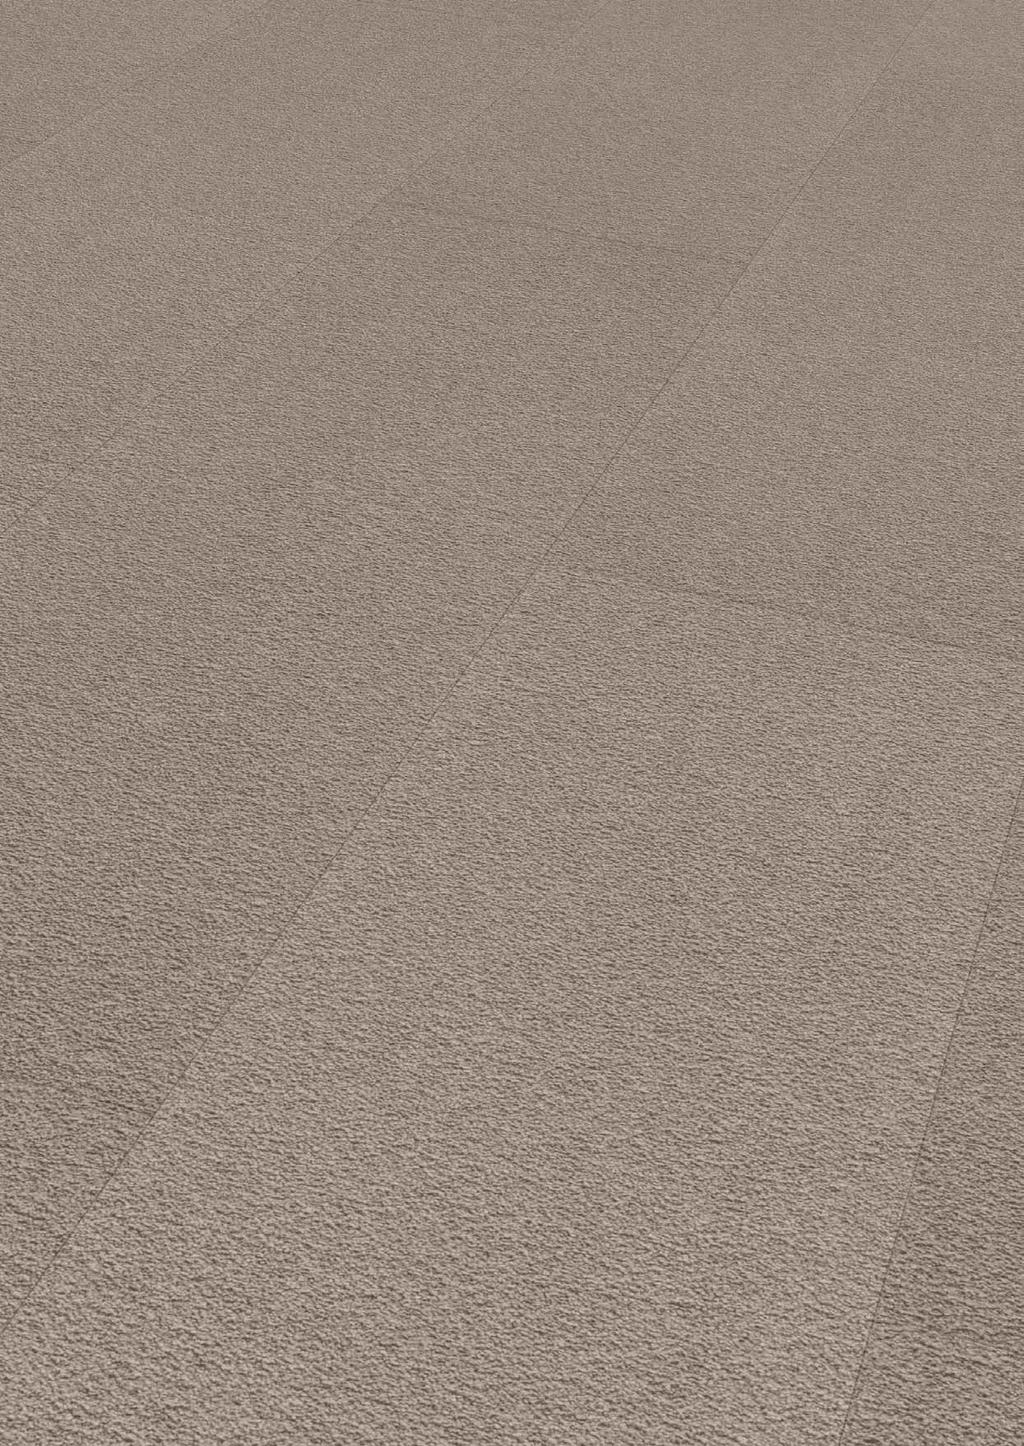 Parador More than a surface The new floors offer more than a purely textile finish.